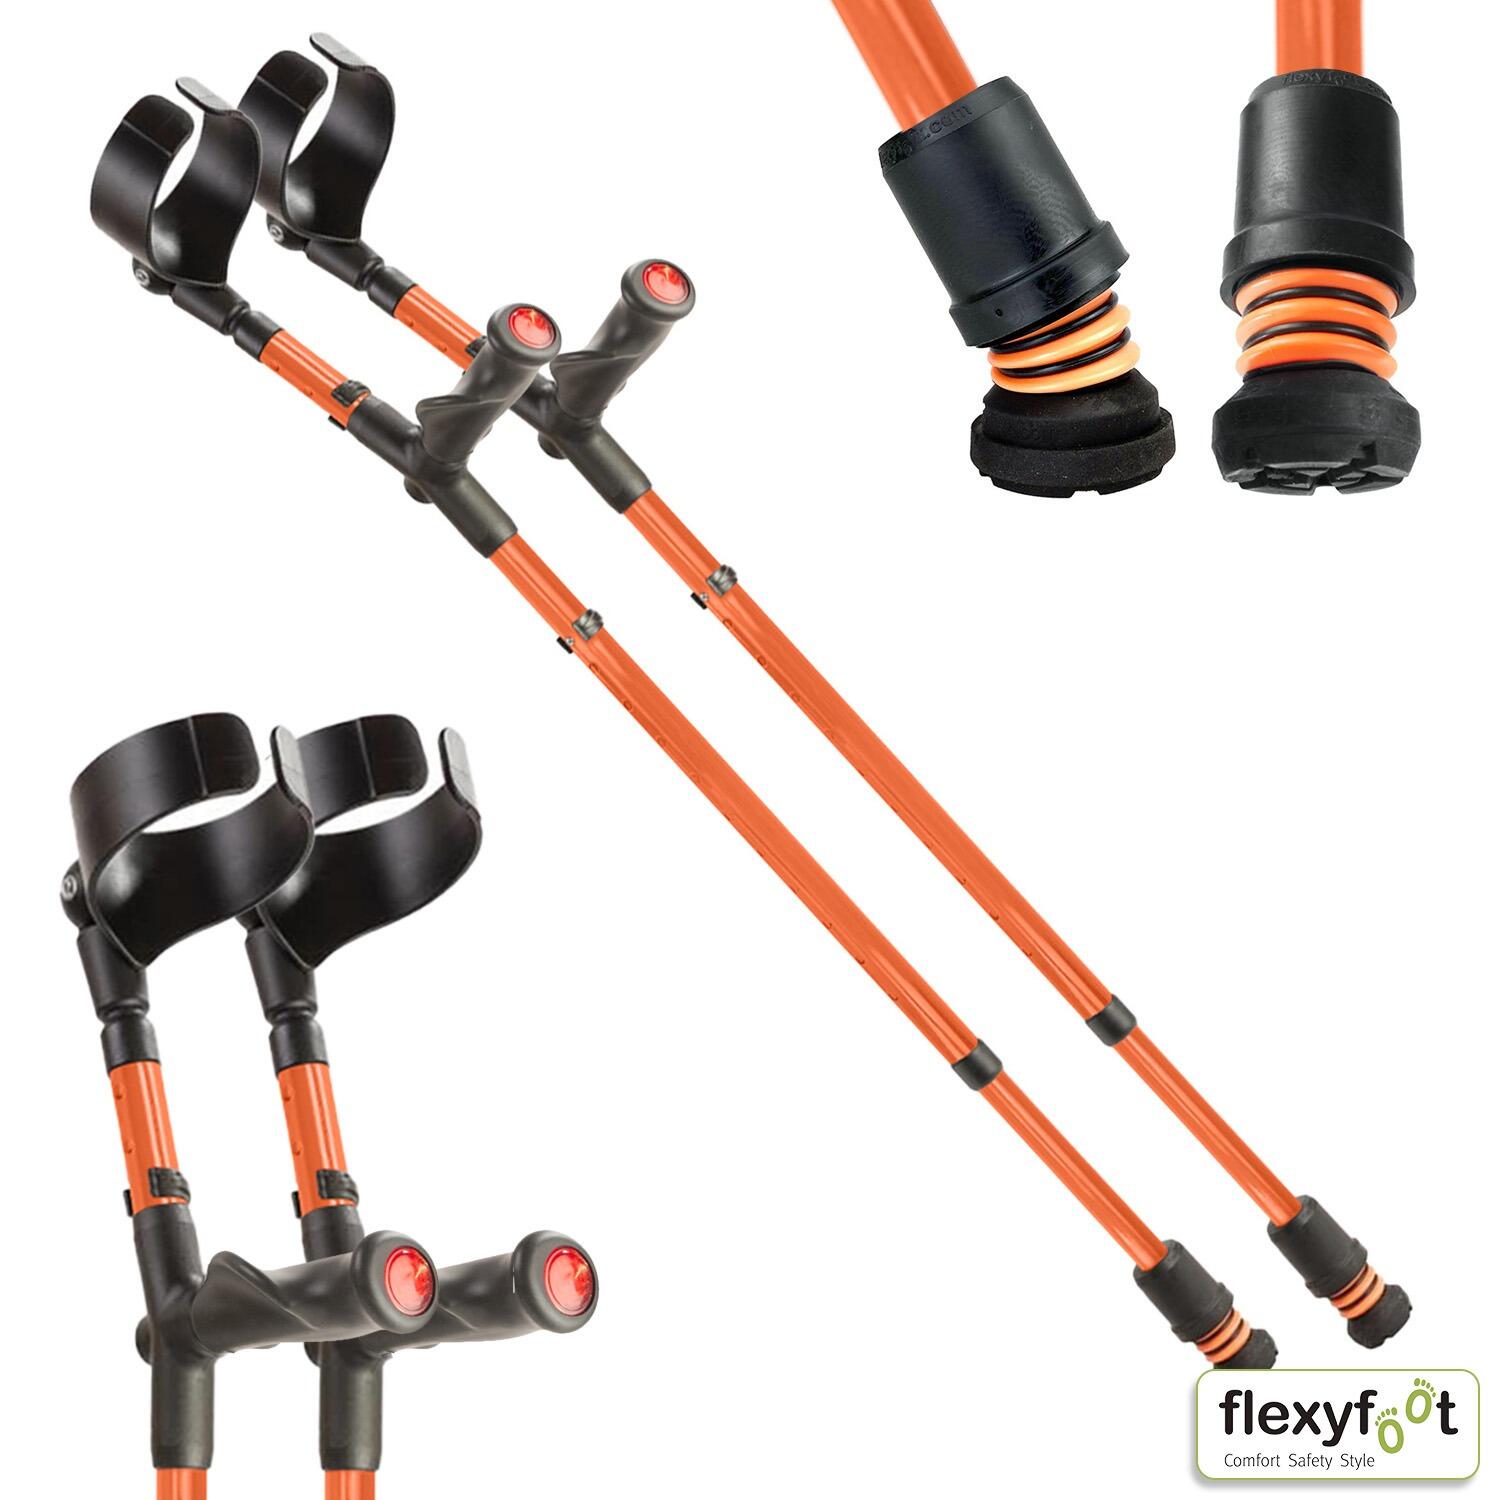 A pair of orange Flexyfoot Comfort Grip Double Adjustable Crutches